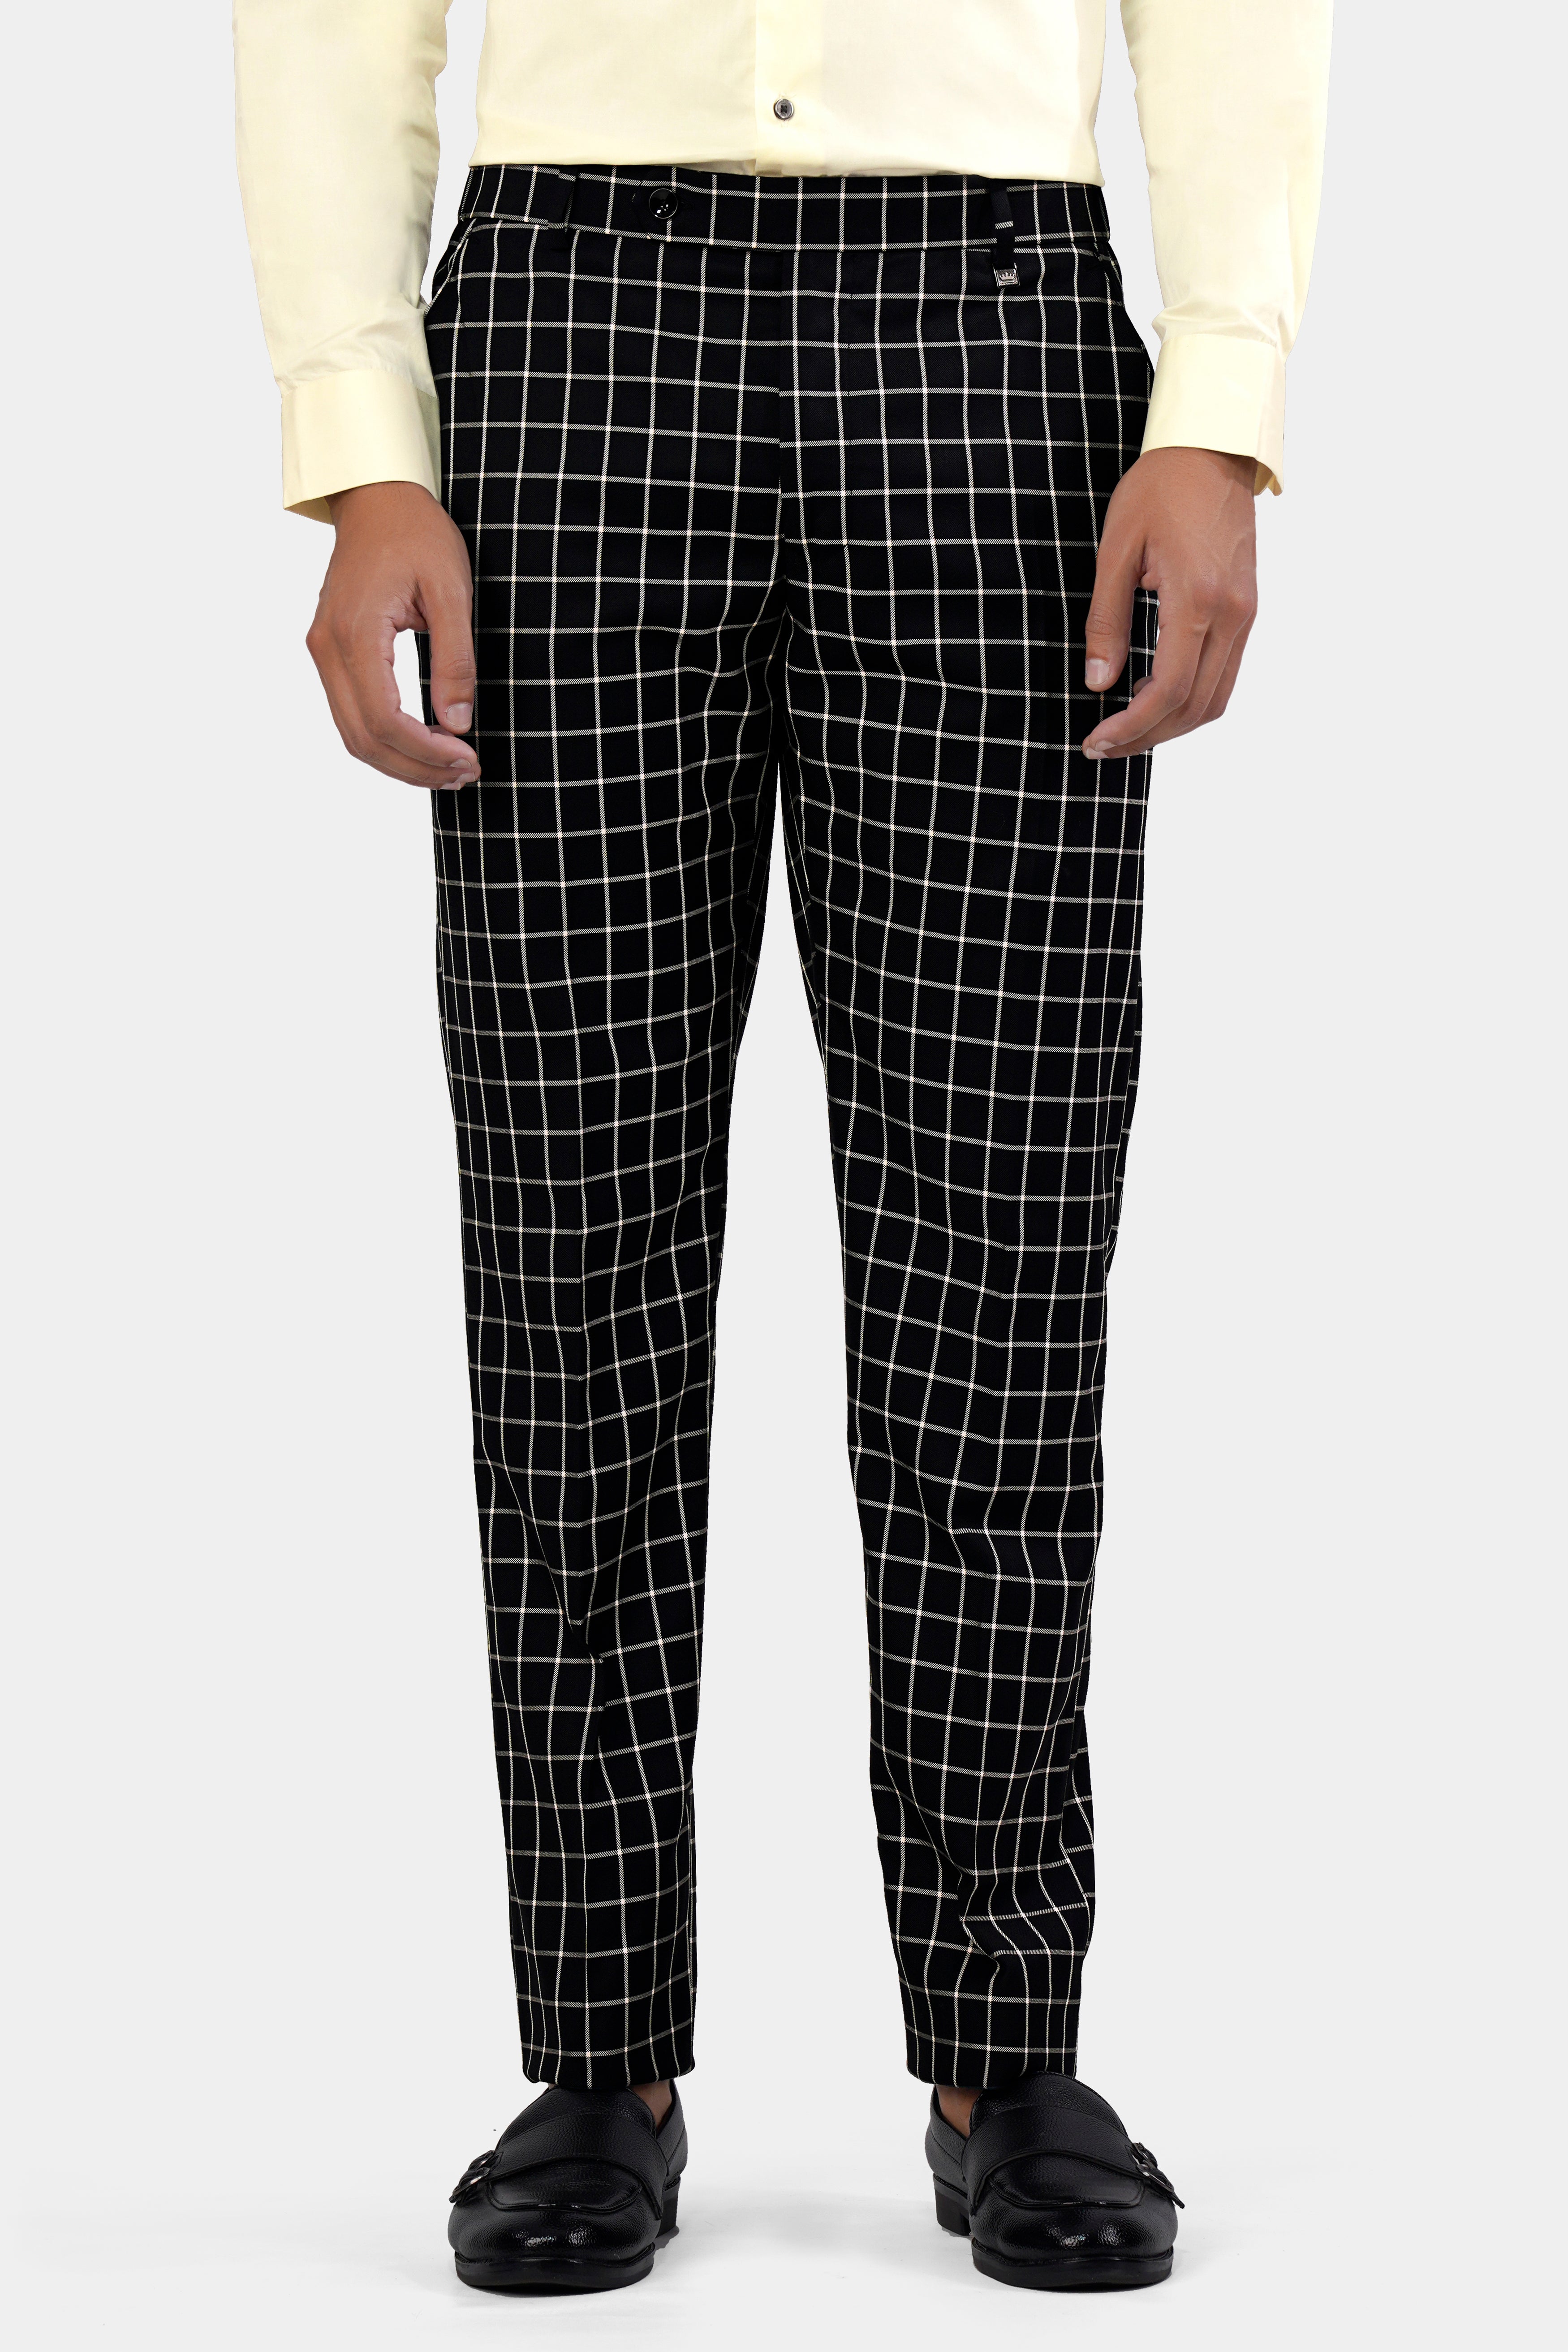 Jade Black and White Checkered Wool Rich Double Breasted Suit ST2932-DB-36, ST2932-DB-38, ST2932-DB-40, ST2932-DB-42, ST2932-DB-44, ST2932-DB-46, ST2932-DB-48, ST2932-DB-50, ST2932-DB-52, ST2932-DB-54, ST2932-DB-56, ST2932-DB-58, ST2932-DB-60